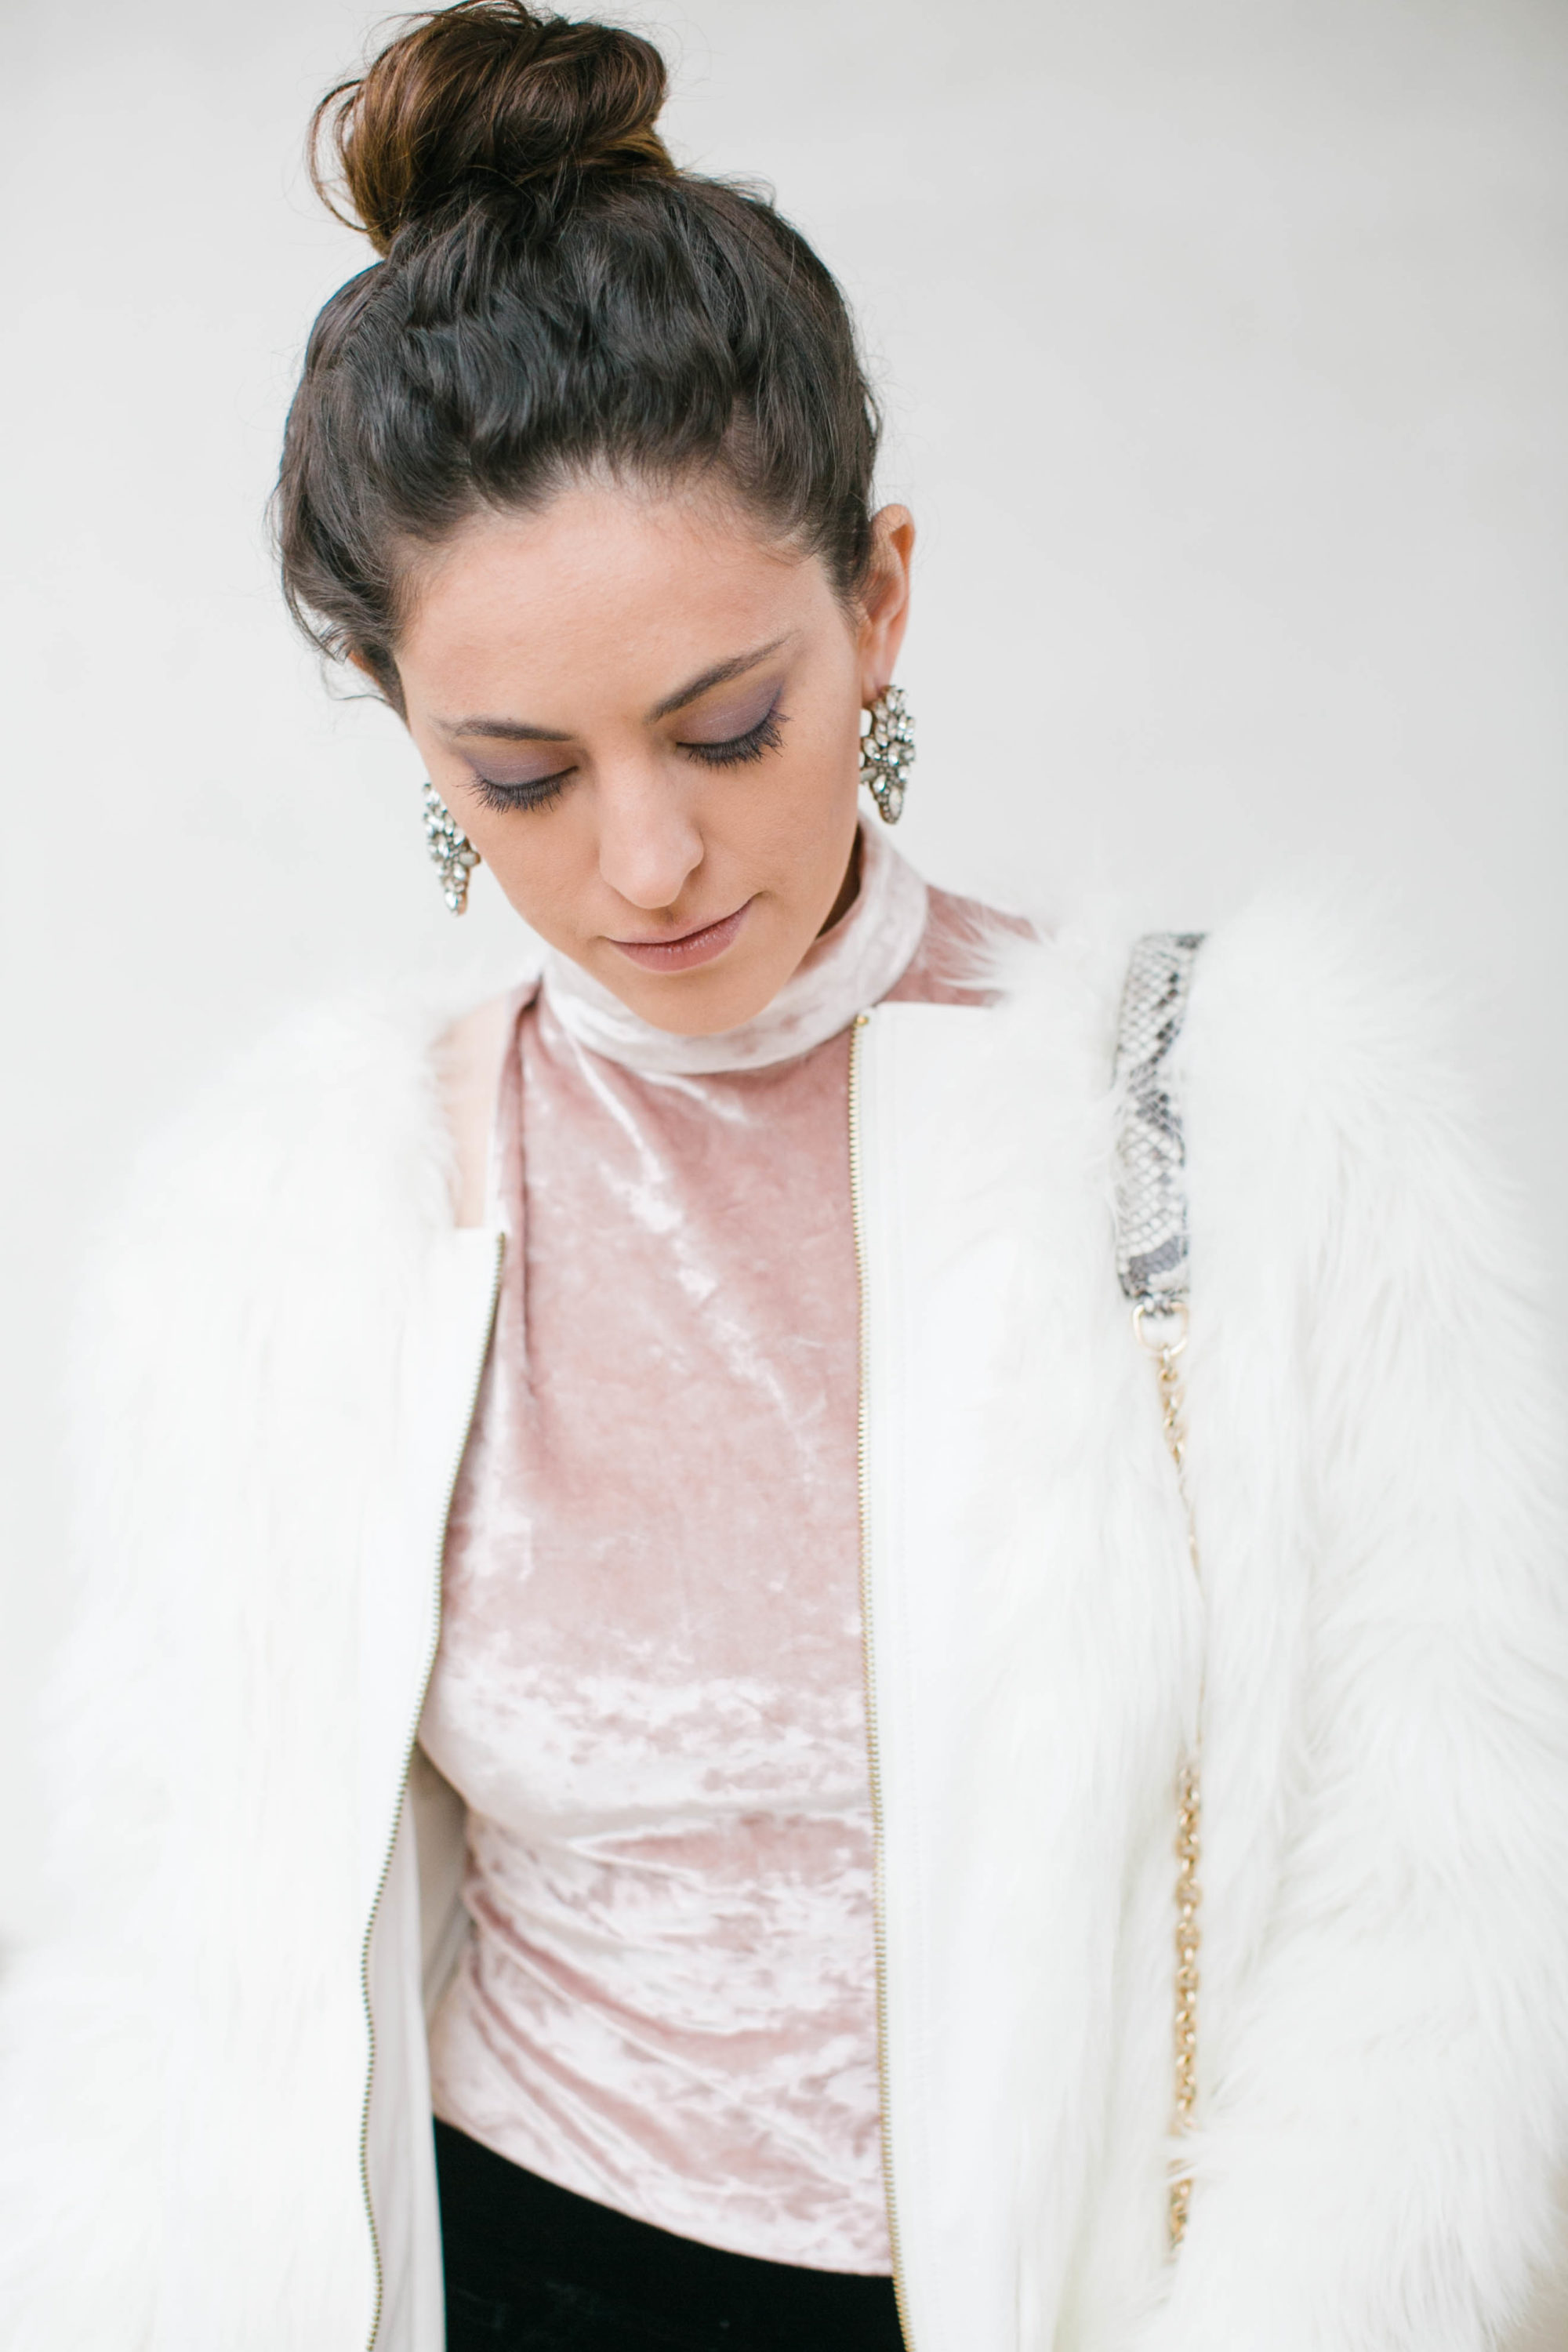 glam new year's eve, nye outfit ideas, what to wear for new year's eve, fancy nye style, nye outfit ideas, how to wear velvet, how to wear crushed velvet, how to wear a big fur coat, Blank Denim Velvet Flare Jeans, BB Dakota Hatherley Crushed Velvet Bodysuit